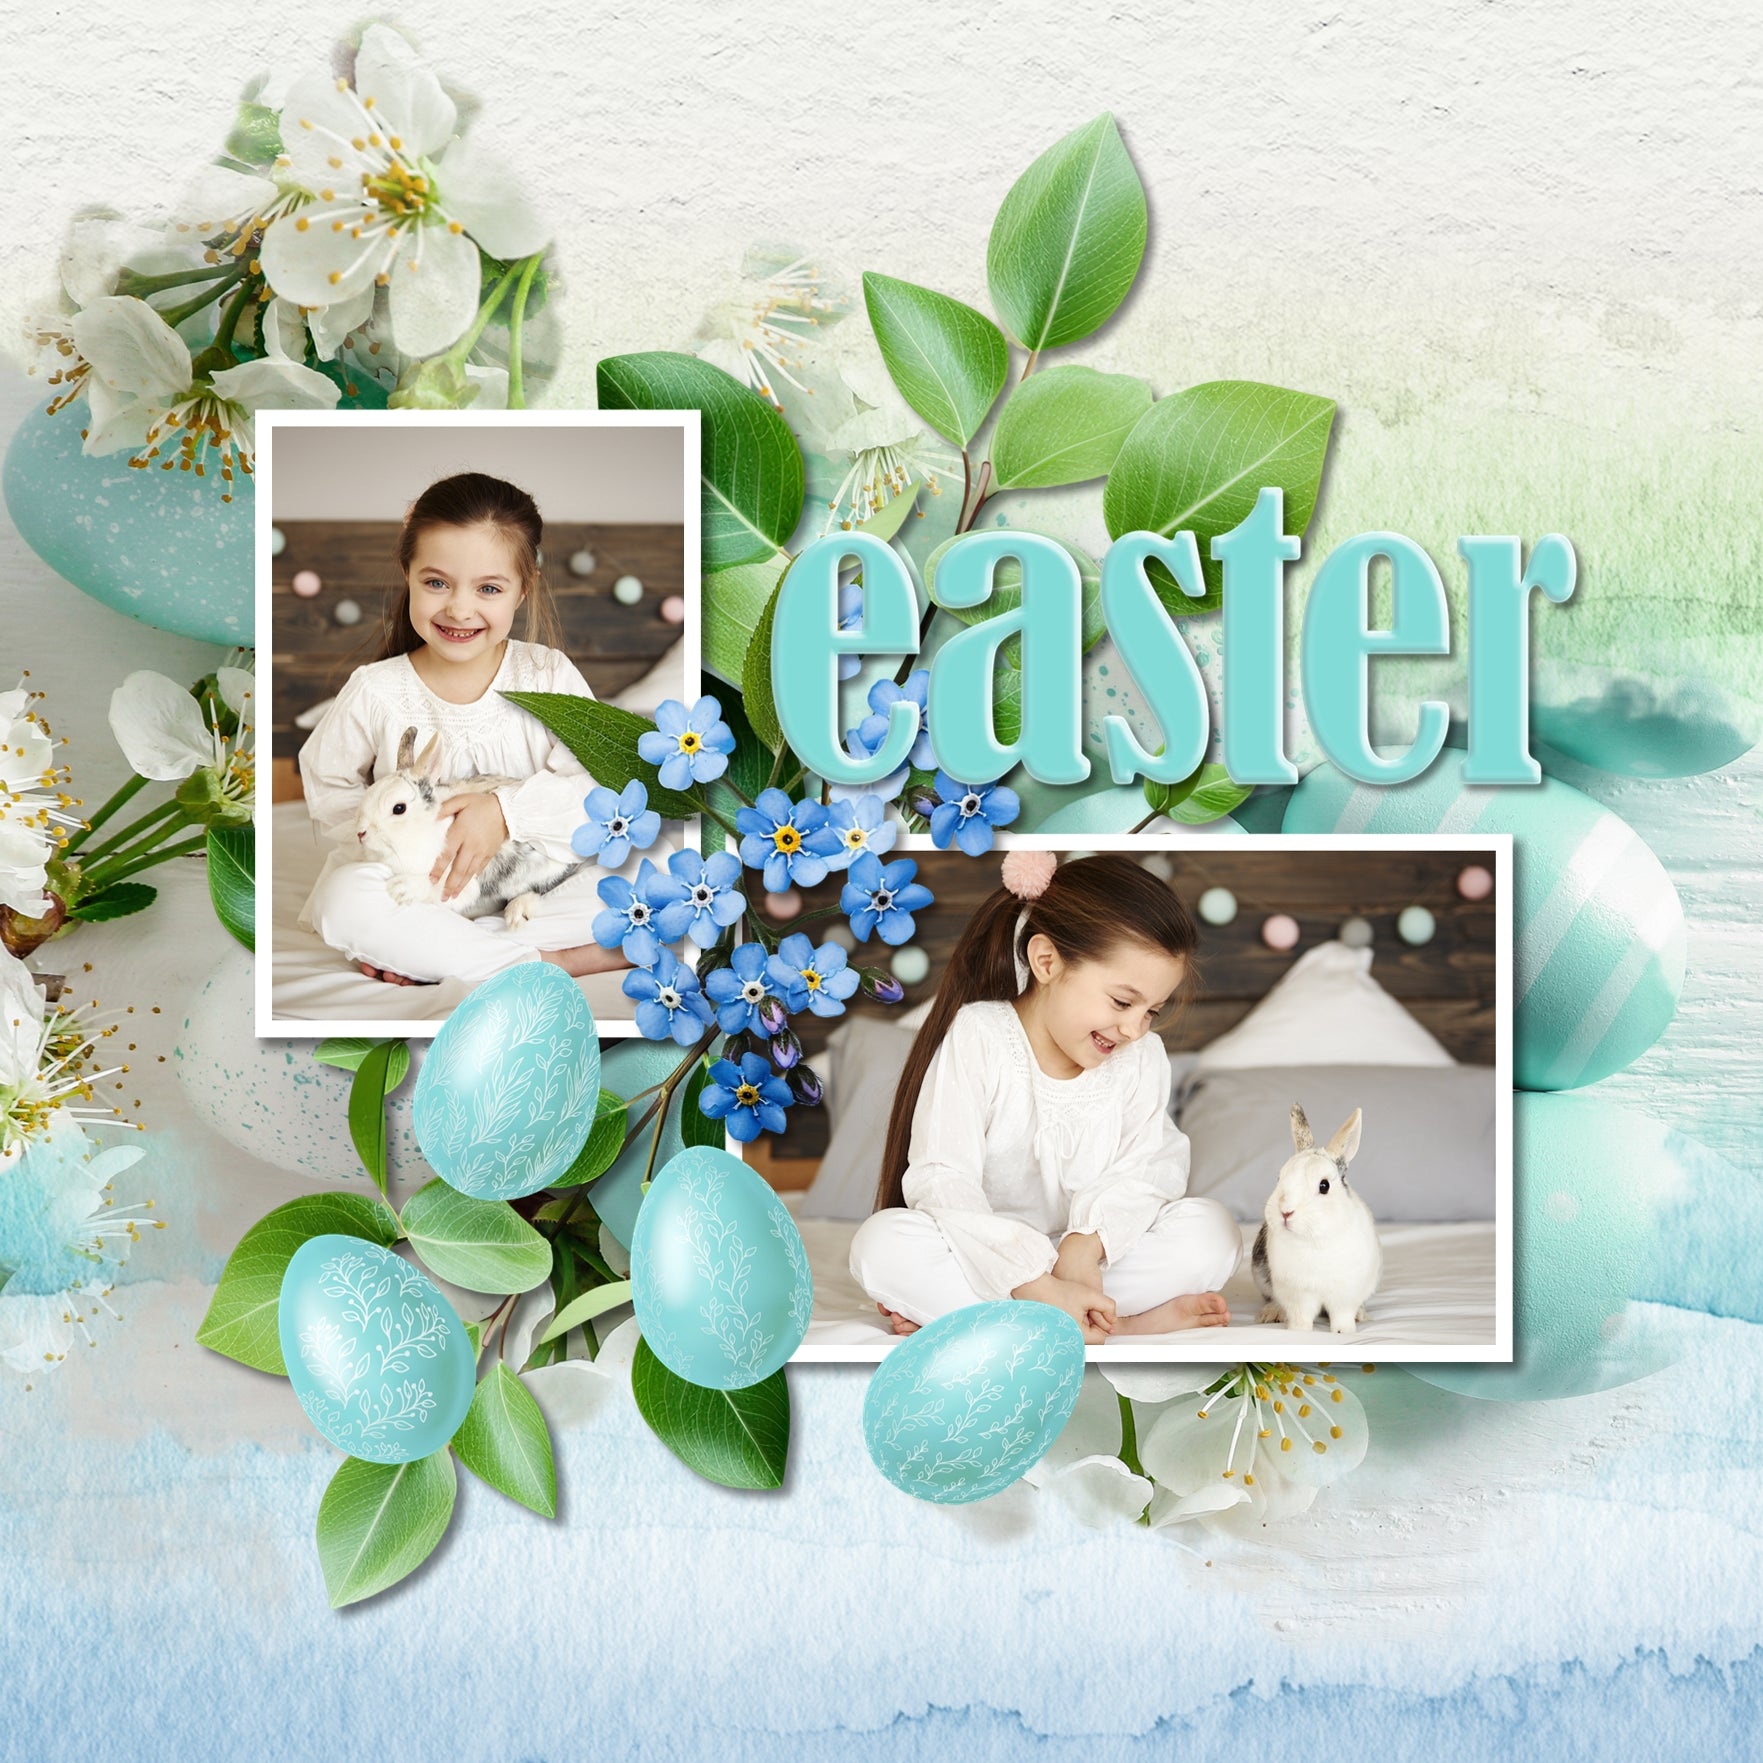 Create your own digital scrapbooking titles and word art with these stylish pastel blue alphabet letters, numbers, and punctuation by Lucky Girl Creative digital art that are perfect for any occasion and theme. Especially great for any Easter, spring, or baby pages. The Easter in Spring Blue Alpha Set consists of a full set of digital art uppercase letters A-Z, lowercase letters a-z, numbers 0-9, and most punctuation marks. 